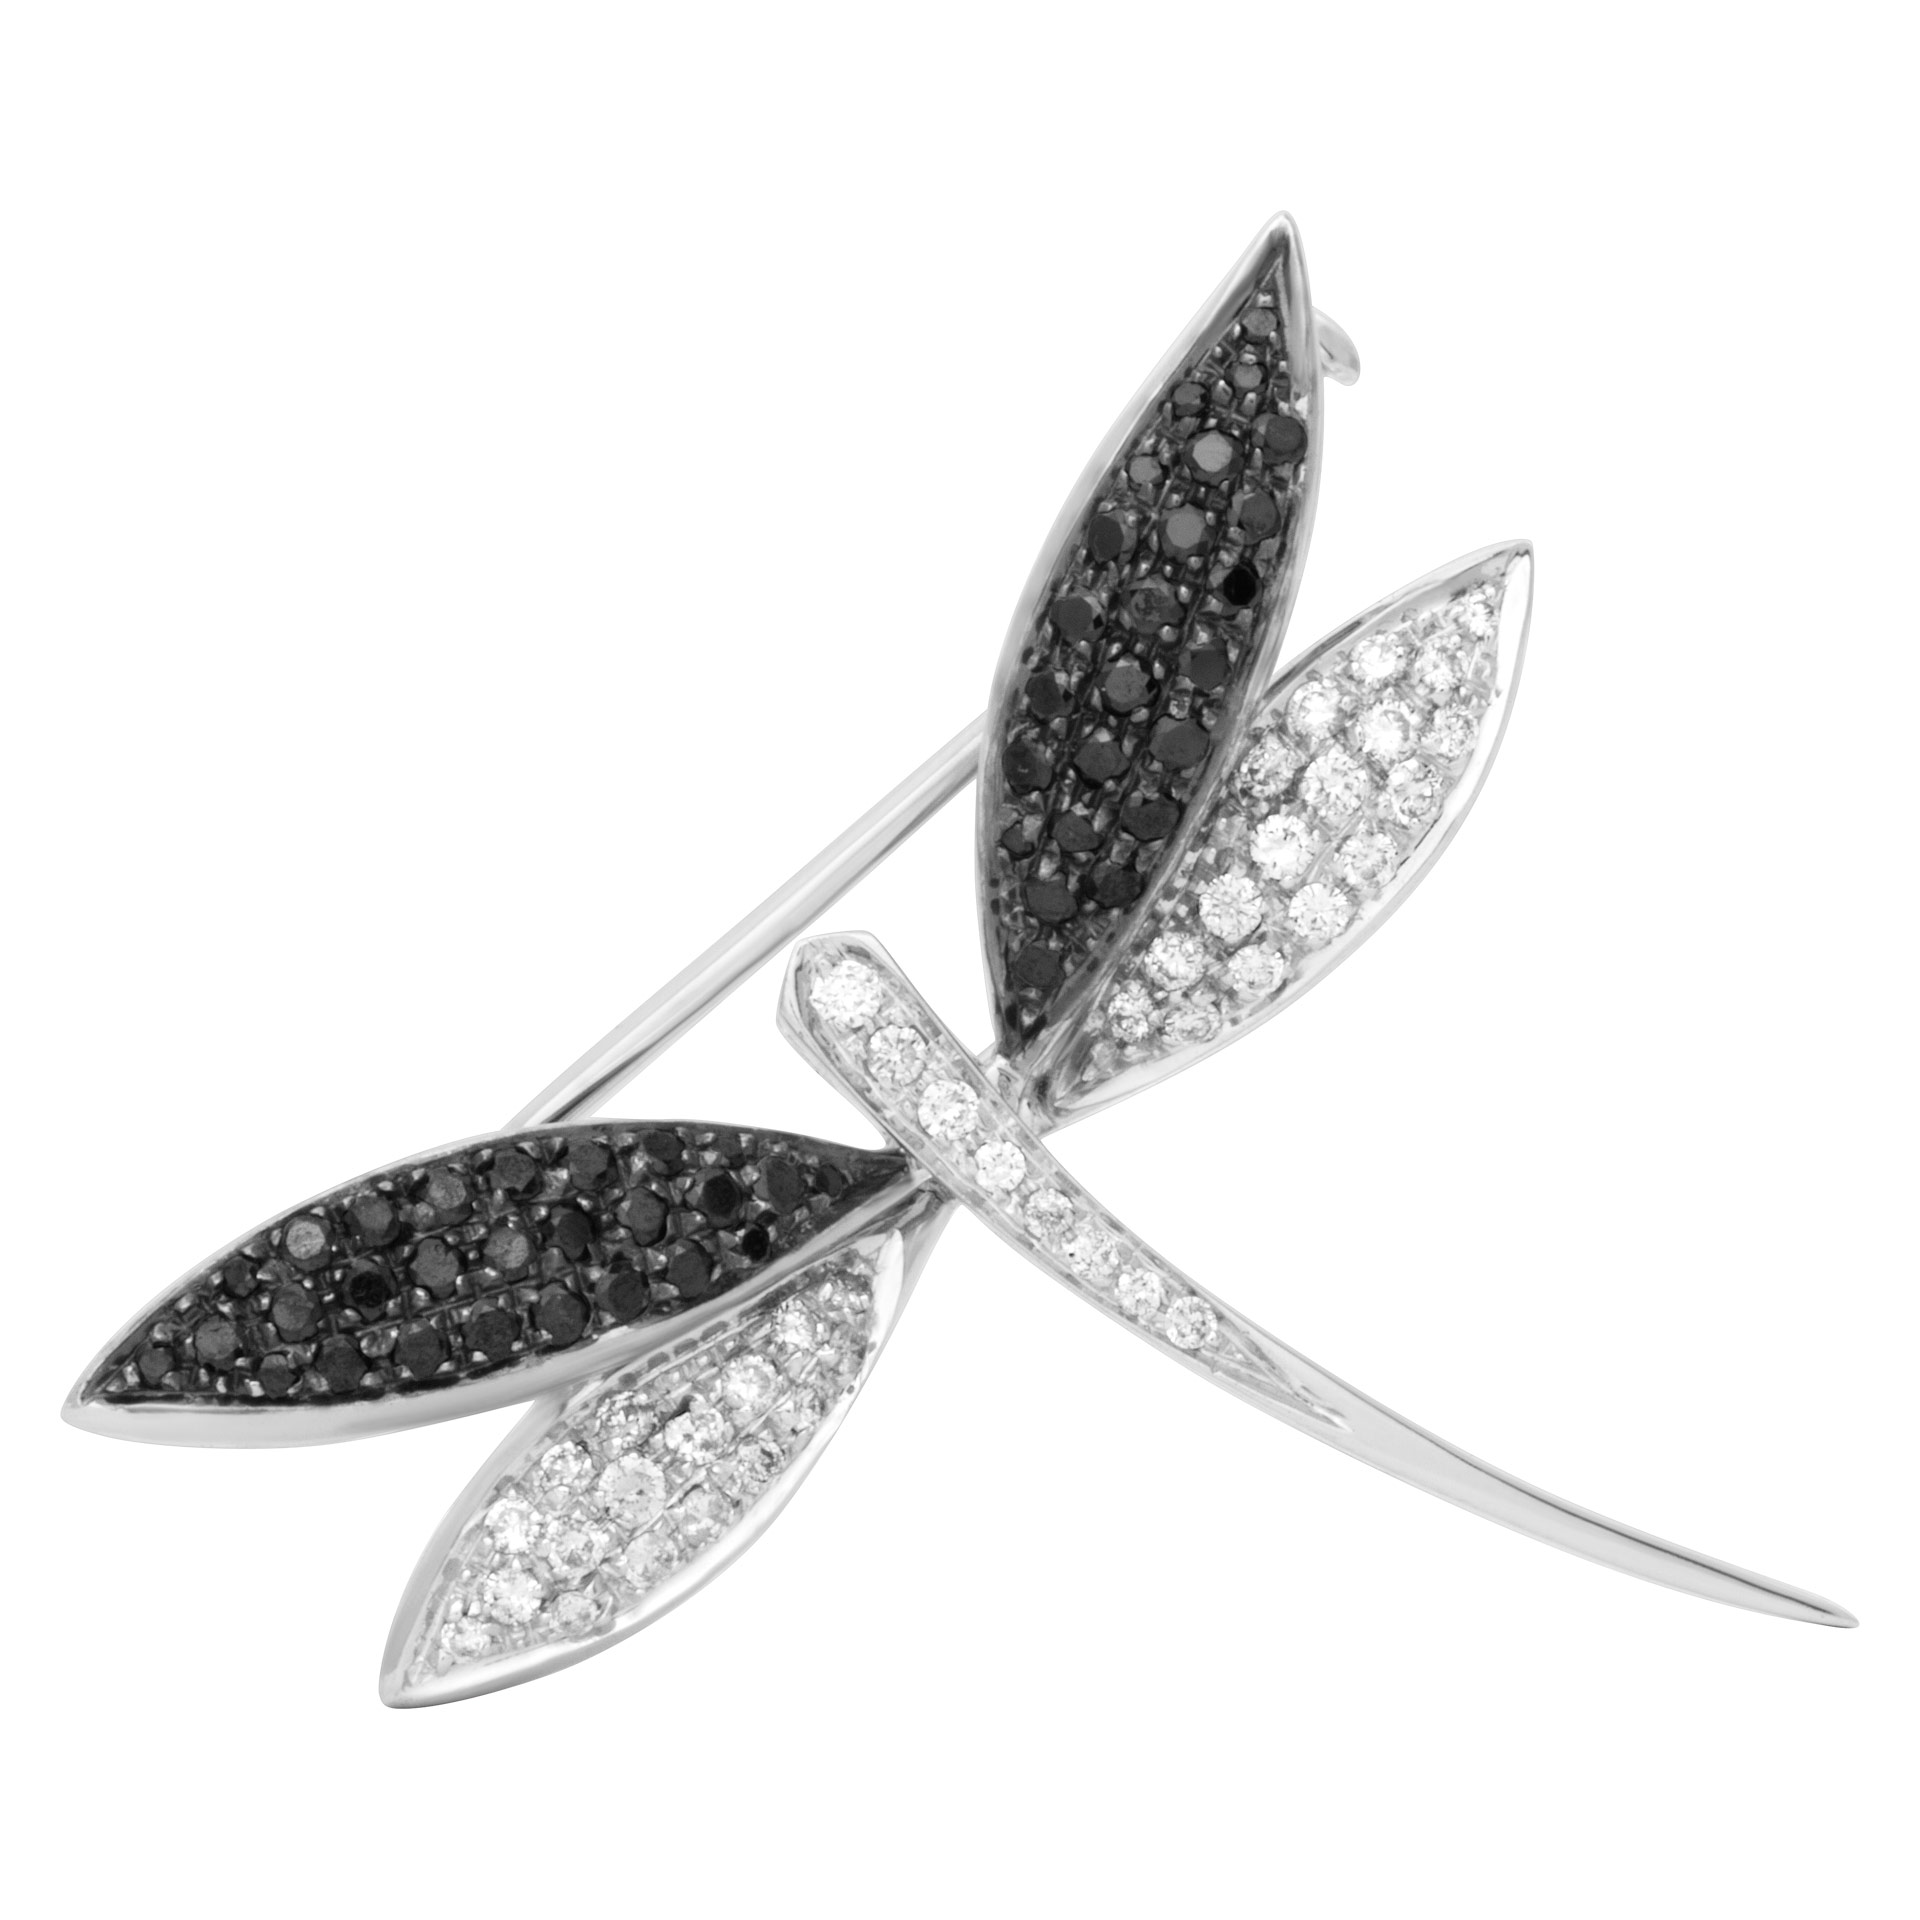 Dragonfly pin in 18k white gold with apptox. 0.60 ct in white diamonds and 0.80 ct in black diamonds